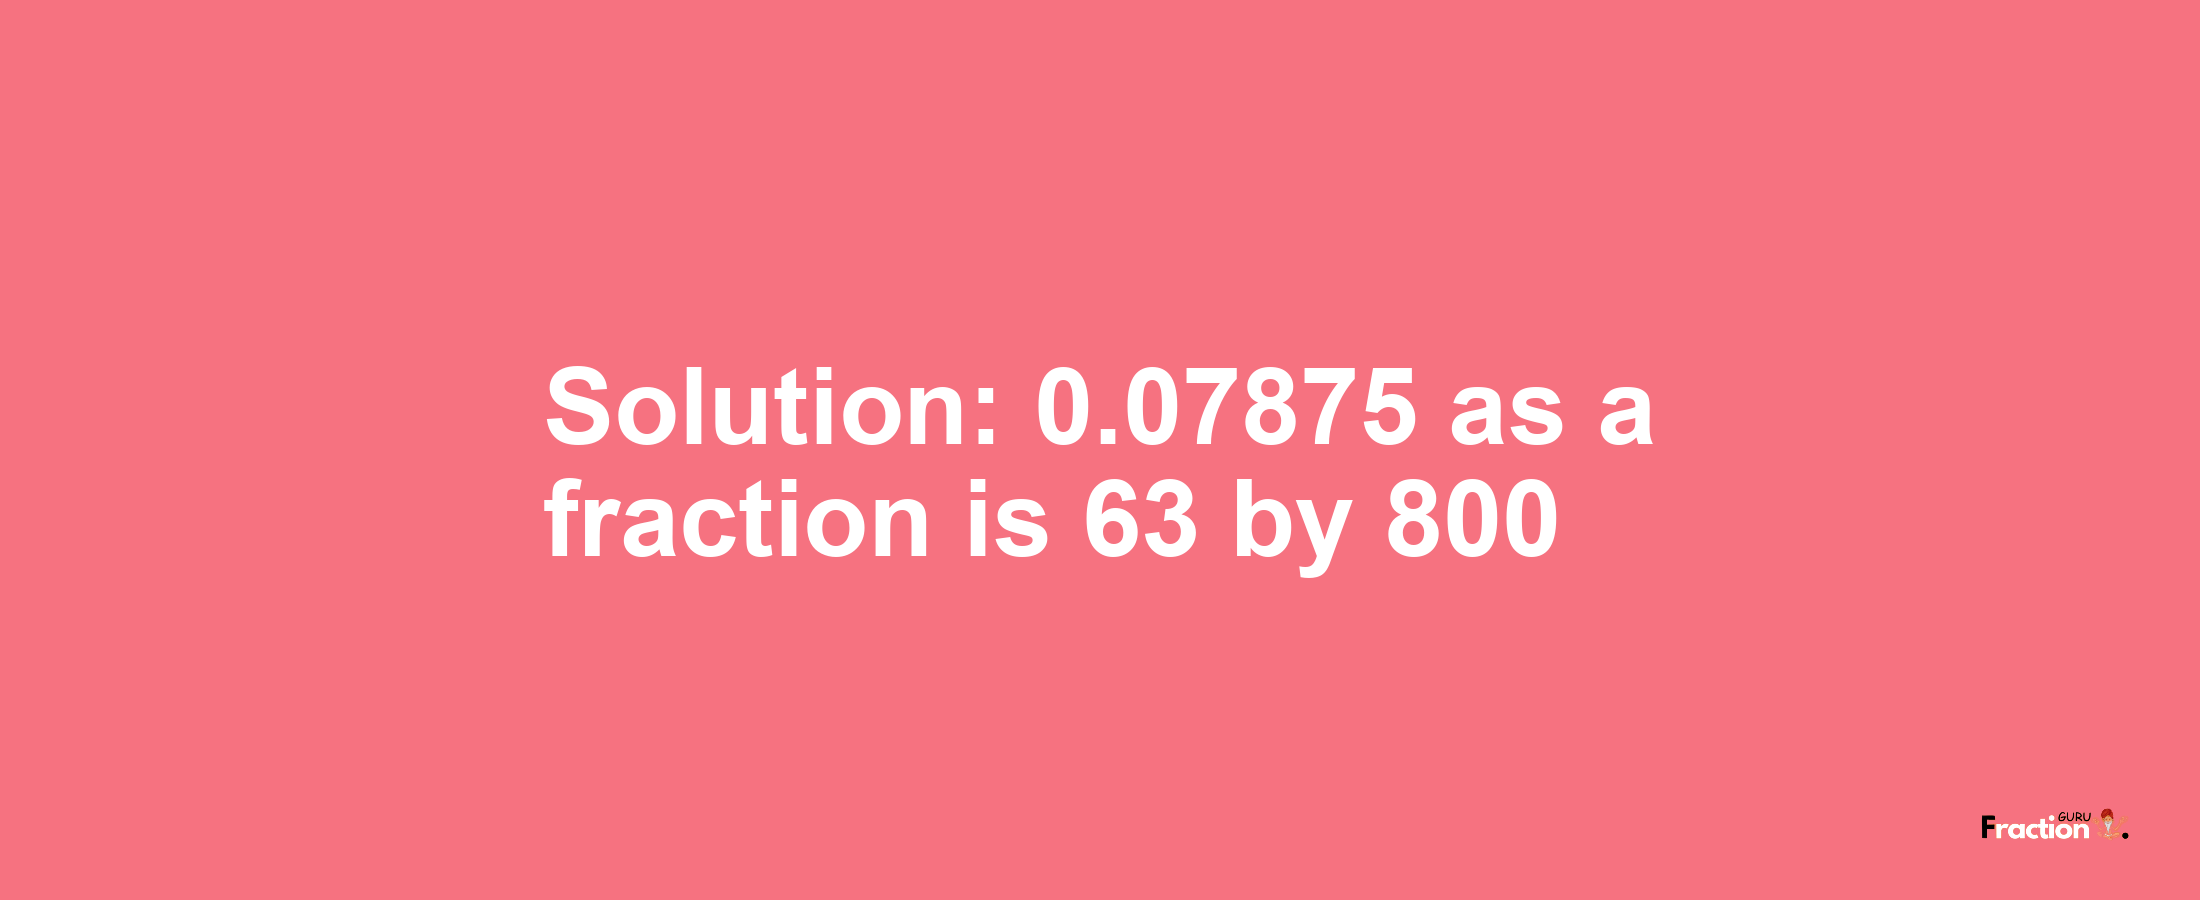 Solution:0.07875 as a fraction is 63/800